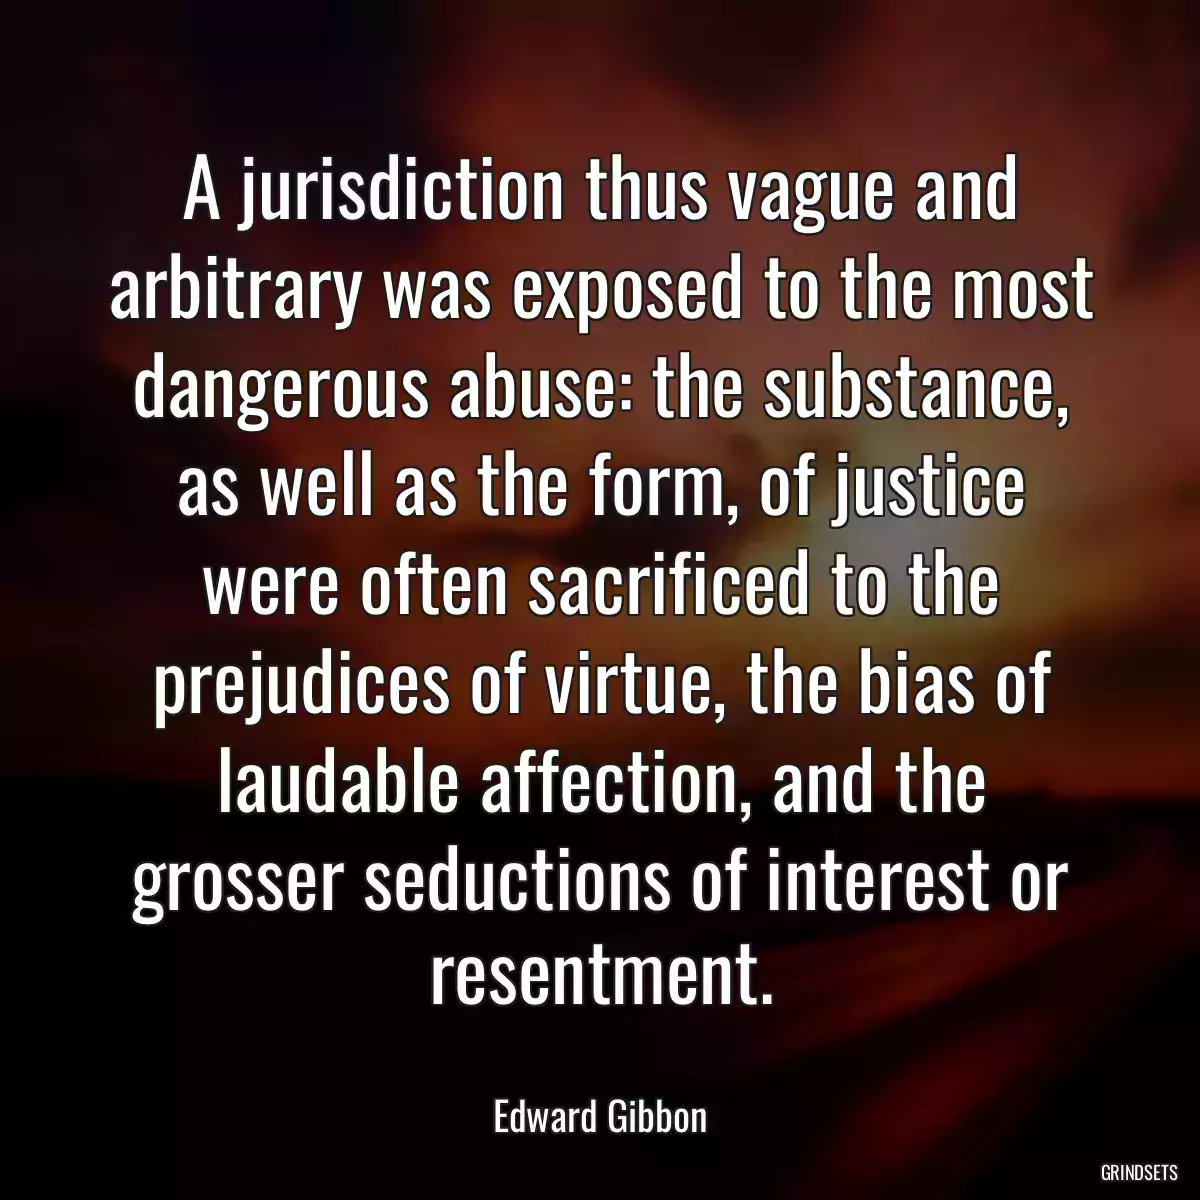 A jurisdiction thus vague and arbitrary was exposed to the most dangerous abuse: the substance, as well as the form, of justice were often sacrificed to the prejudices of virtue, the bias of laudable affection, and the grosser seductions of interest or resentment.